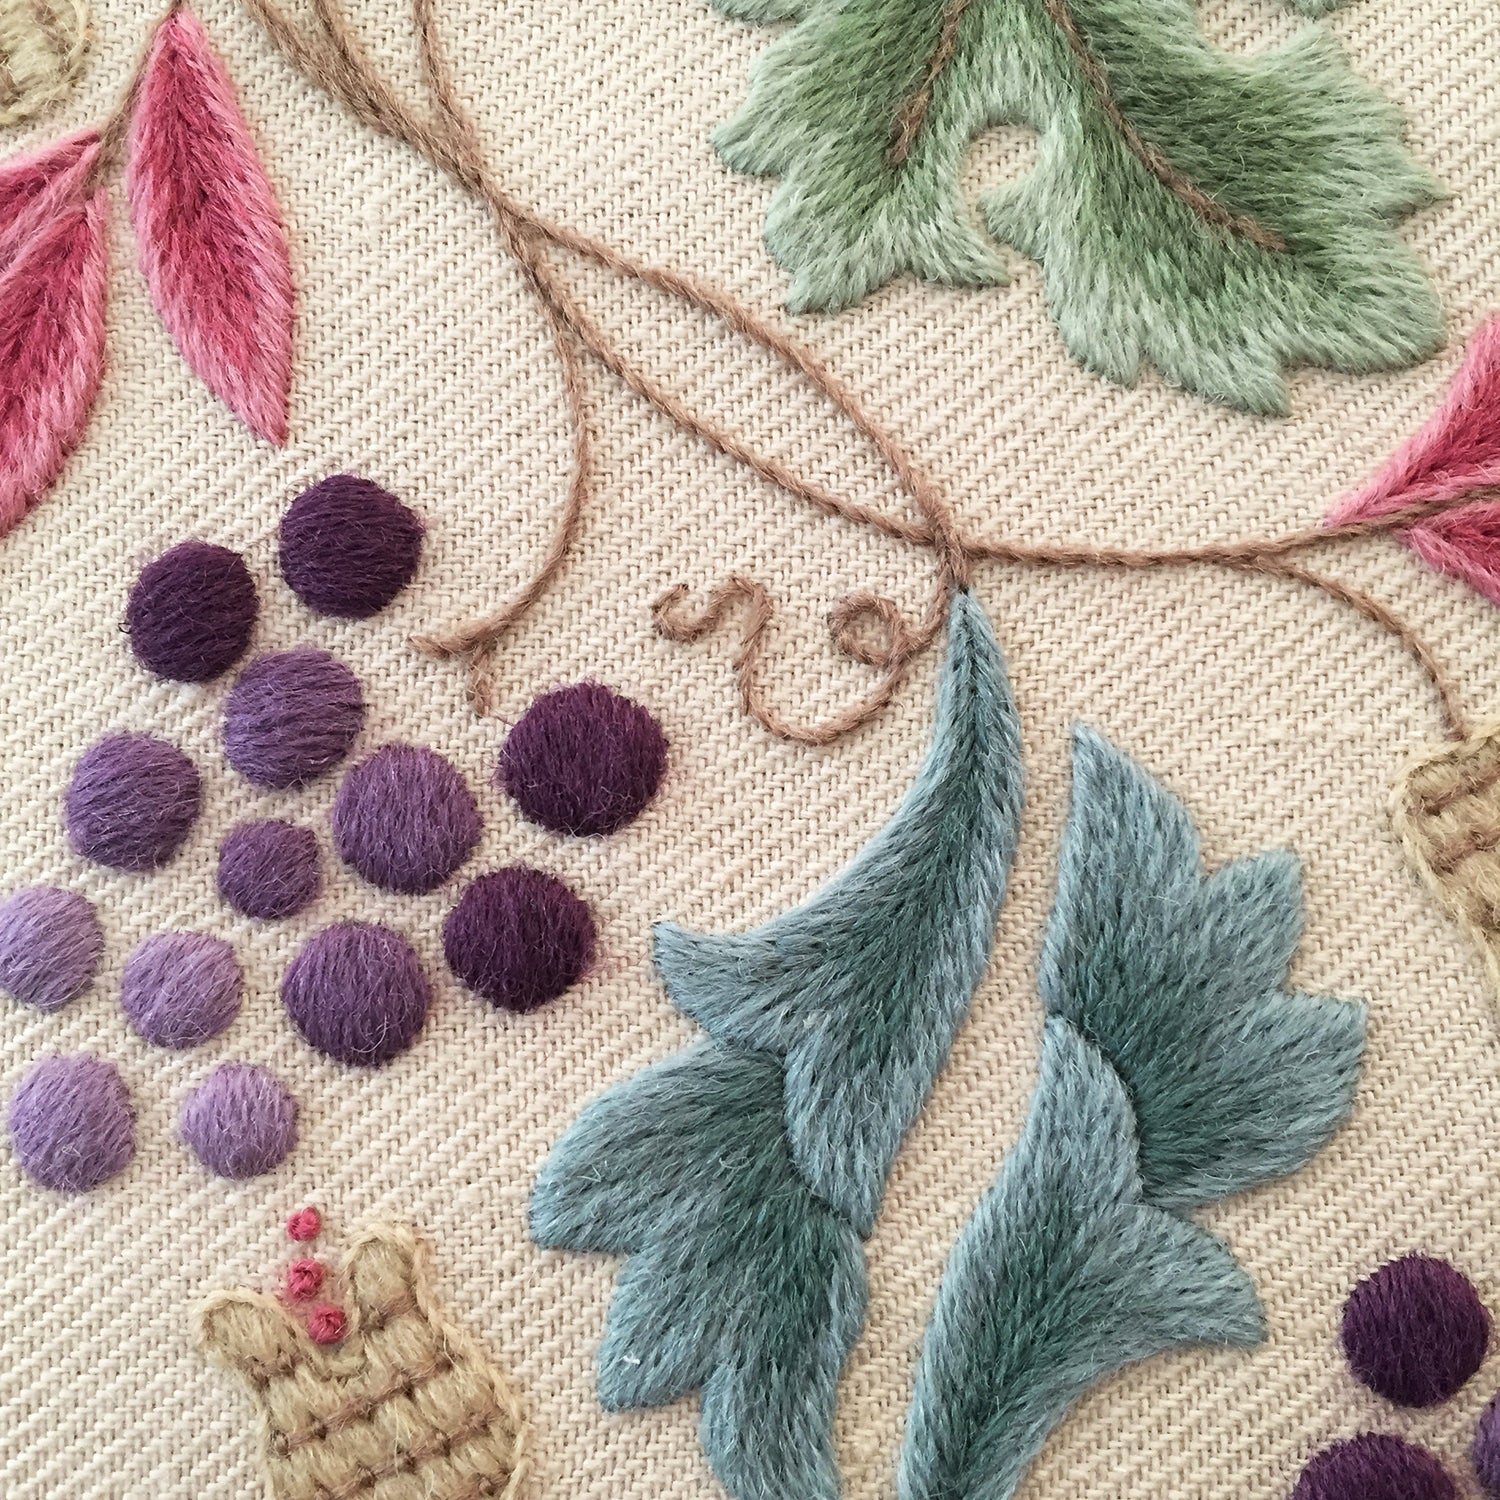 Crewel Embroidery Kit Grapevine and Pippins